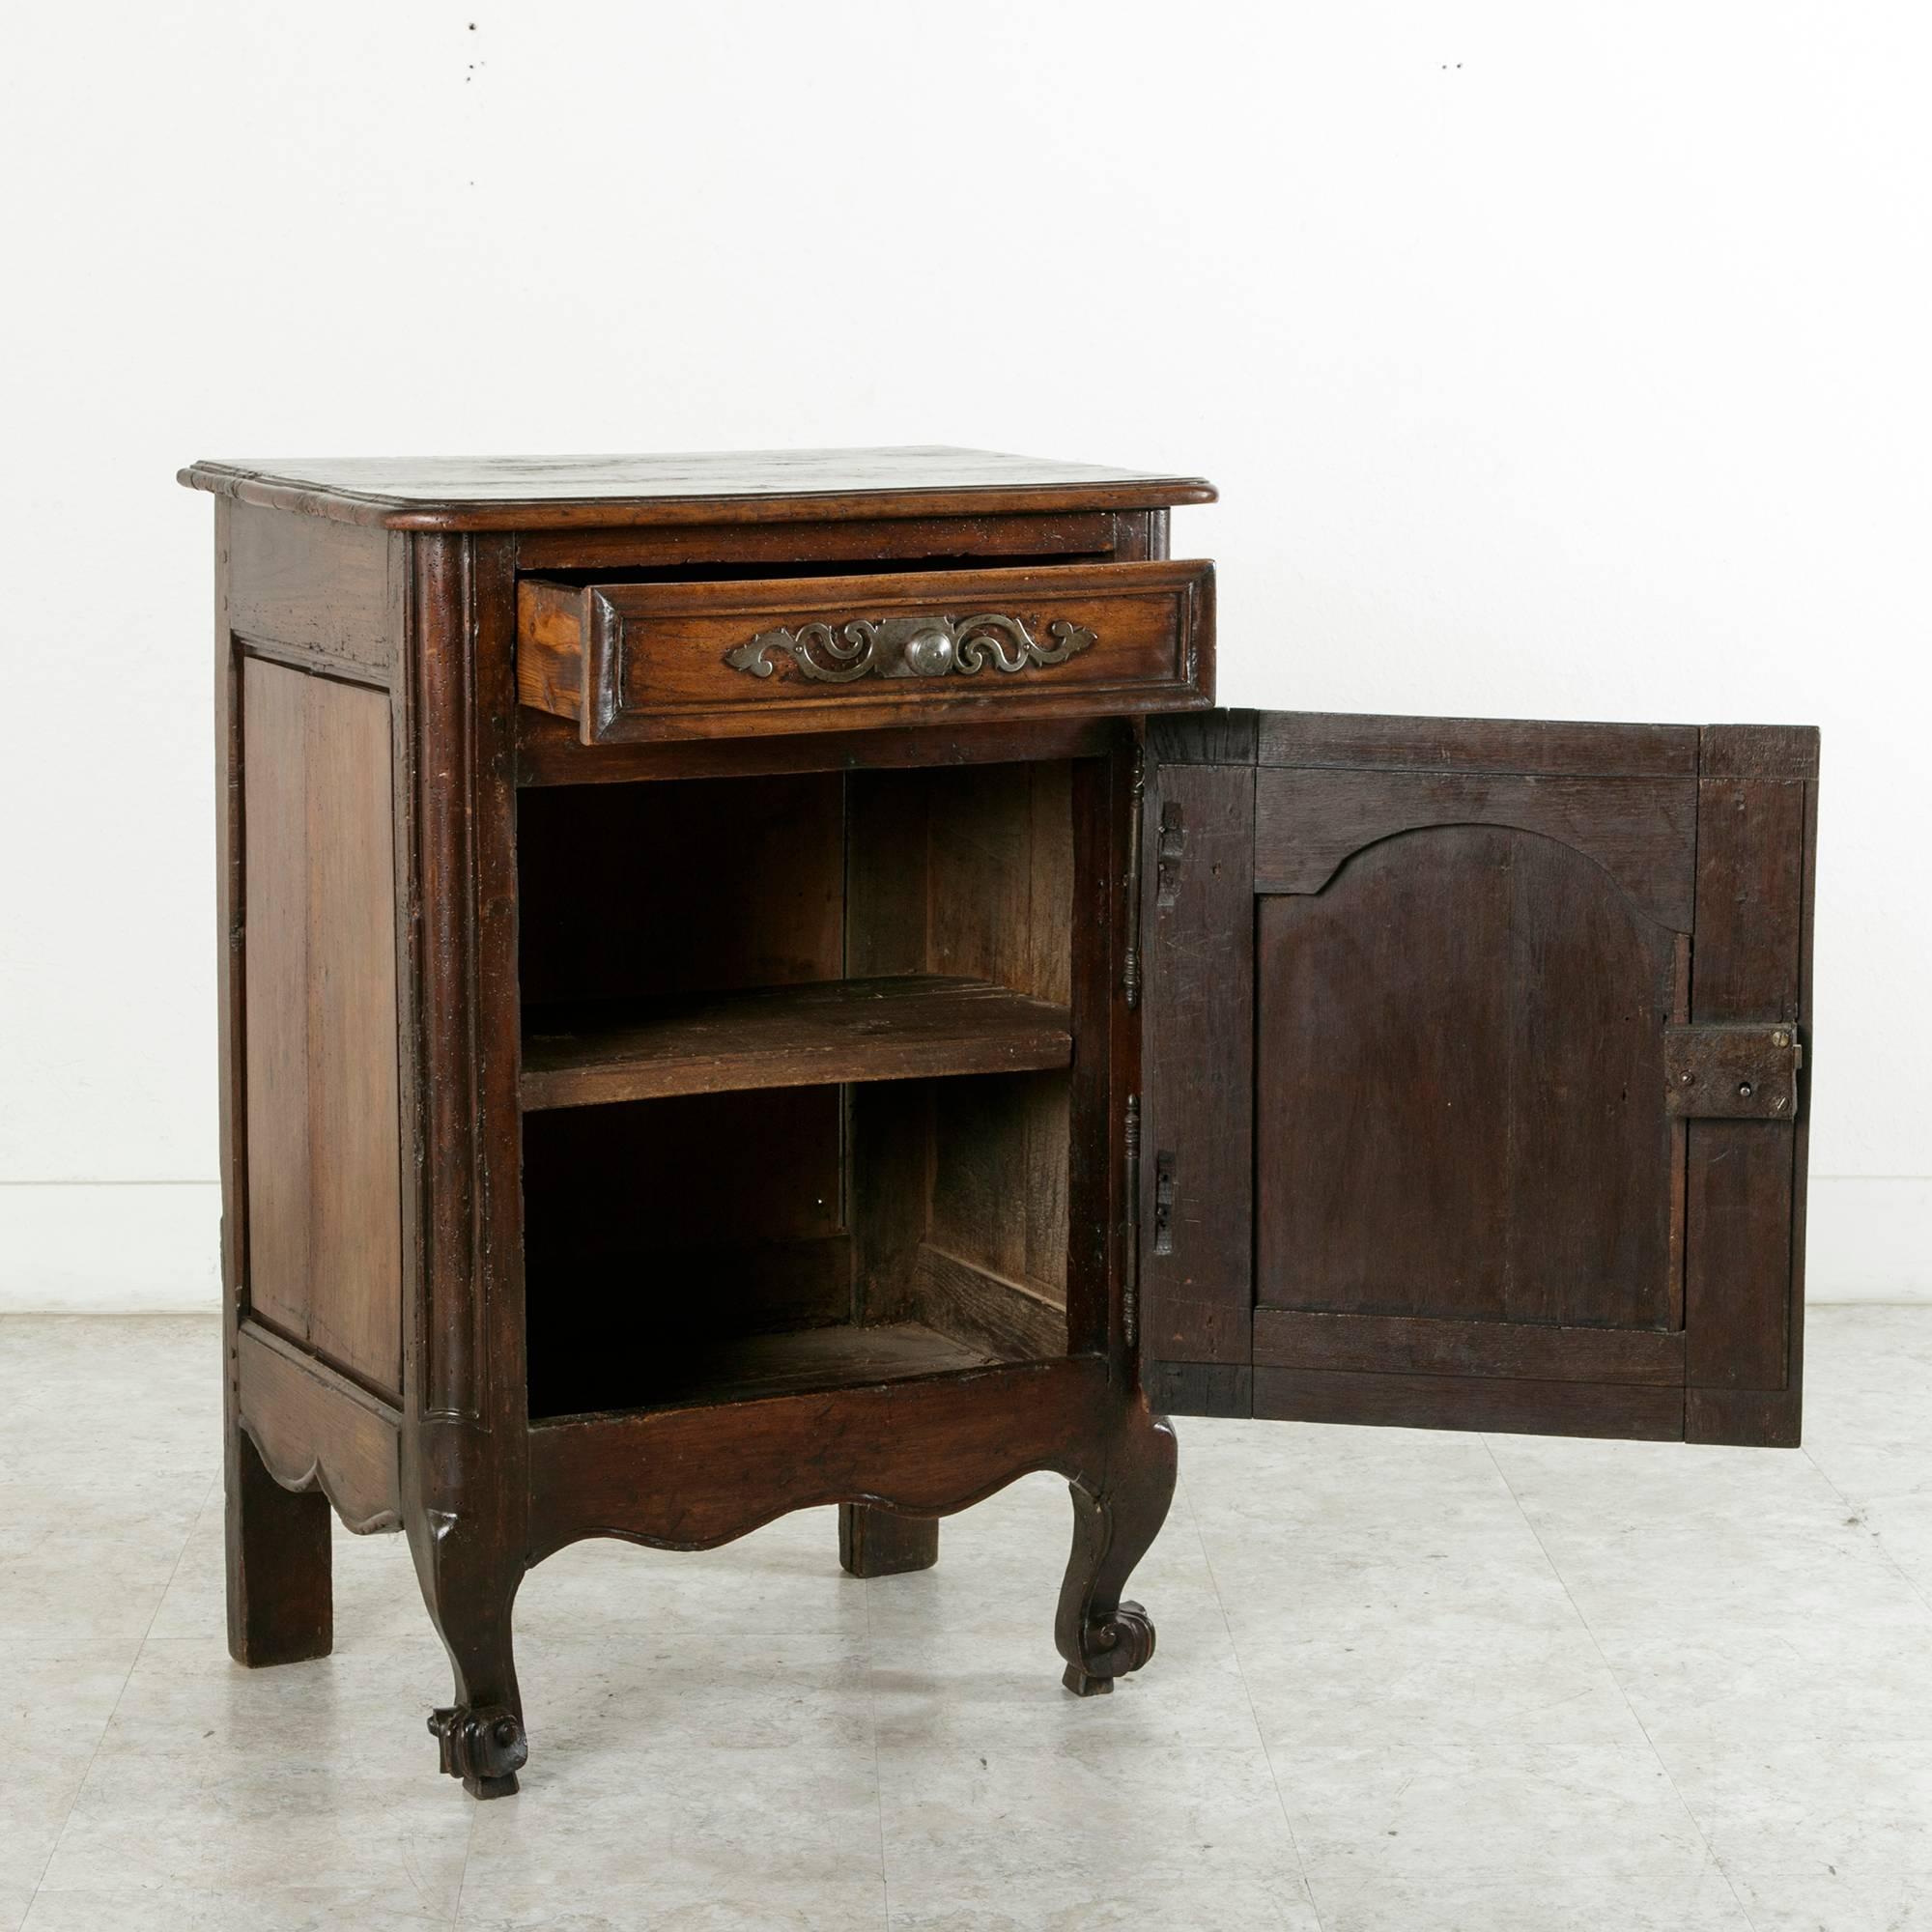 18th Century French Jam Cabinet of Solid Hand-Carved Oak with Iron Hardware 5